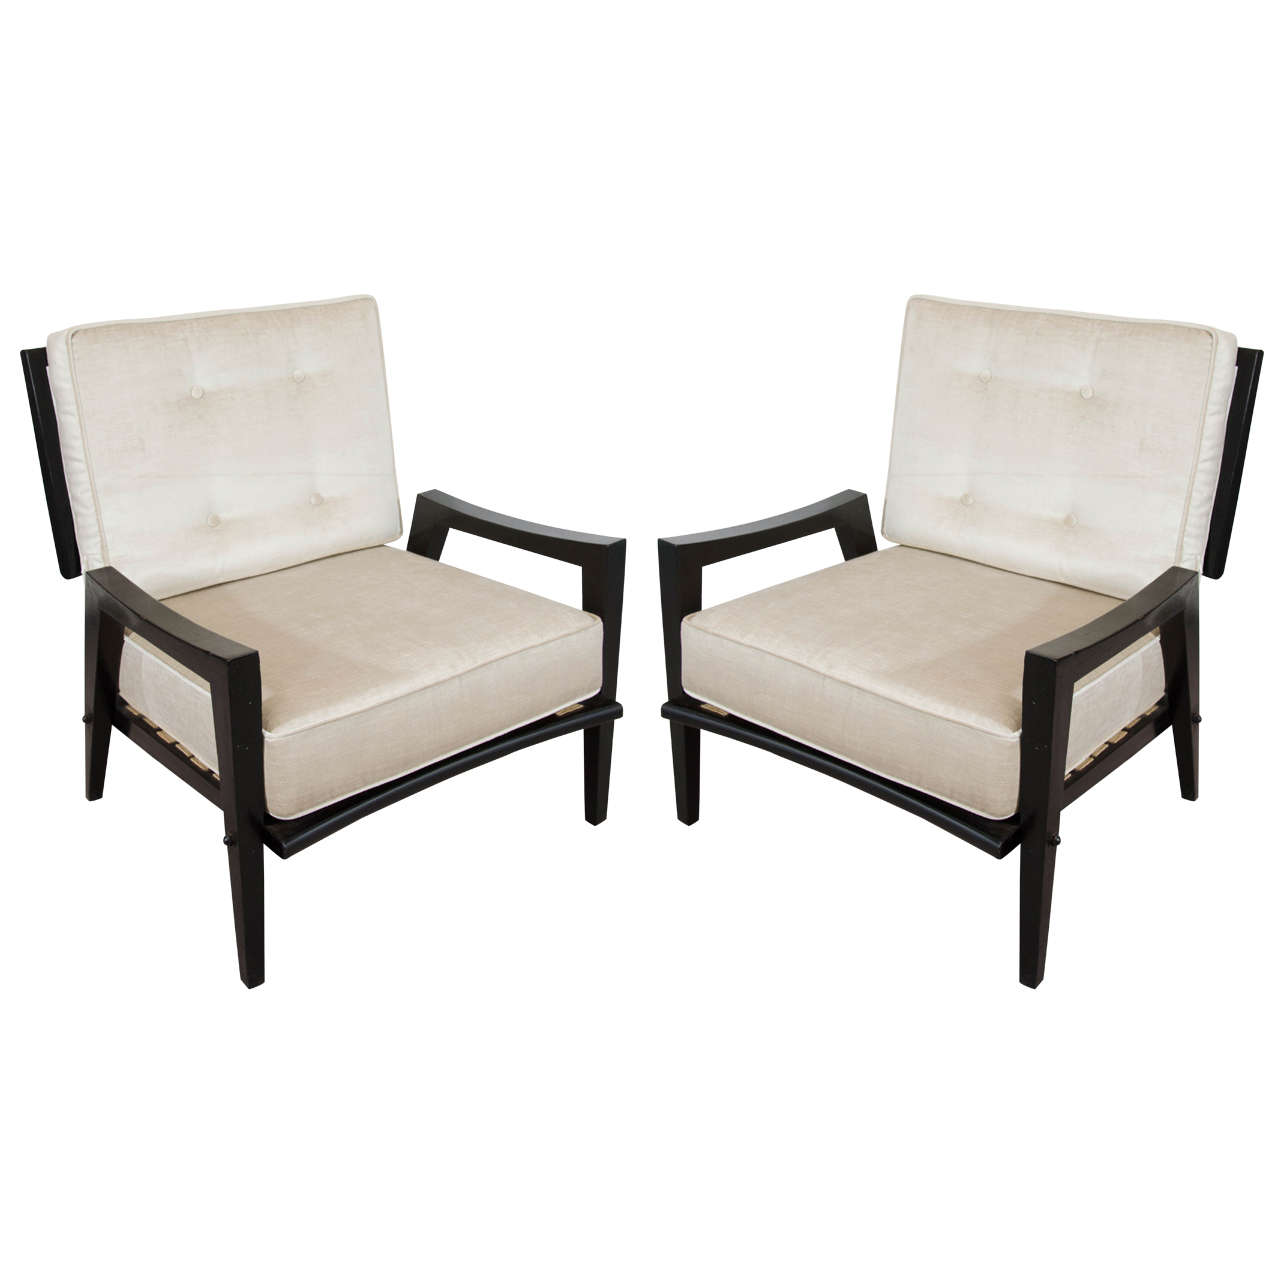 Midcentury Pair of Lounge Chairs with Ebonized Wooden Frame